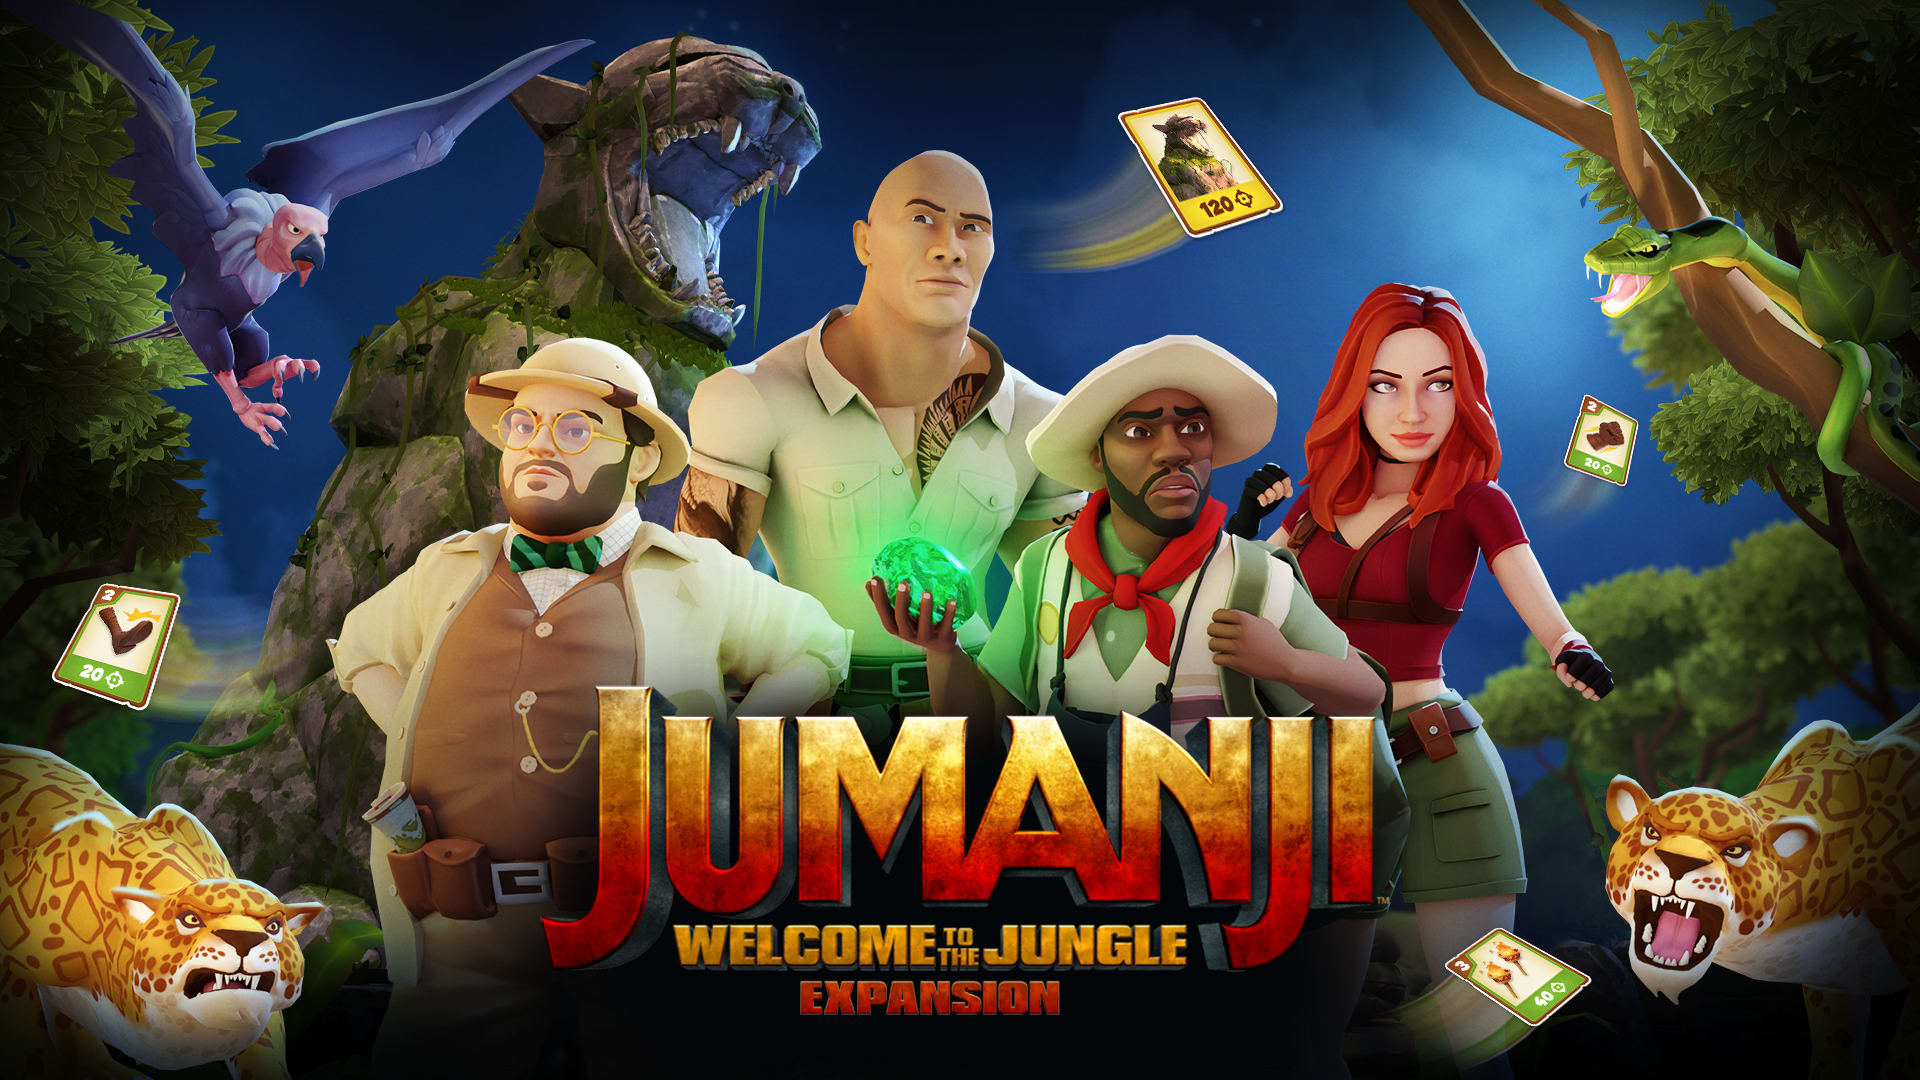 JUMANJI: Welcome to the Jungle Expansion